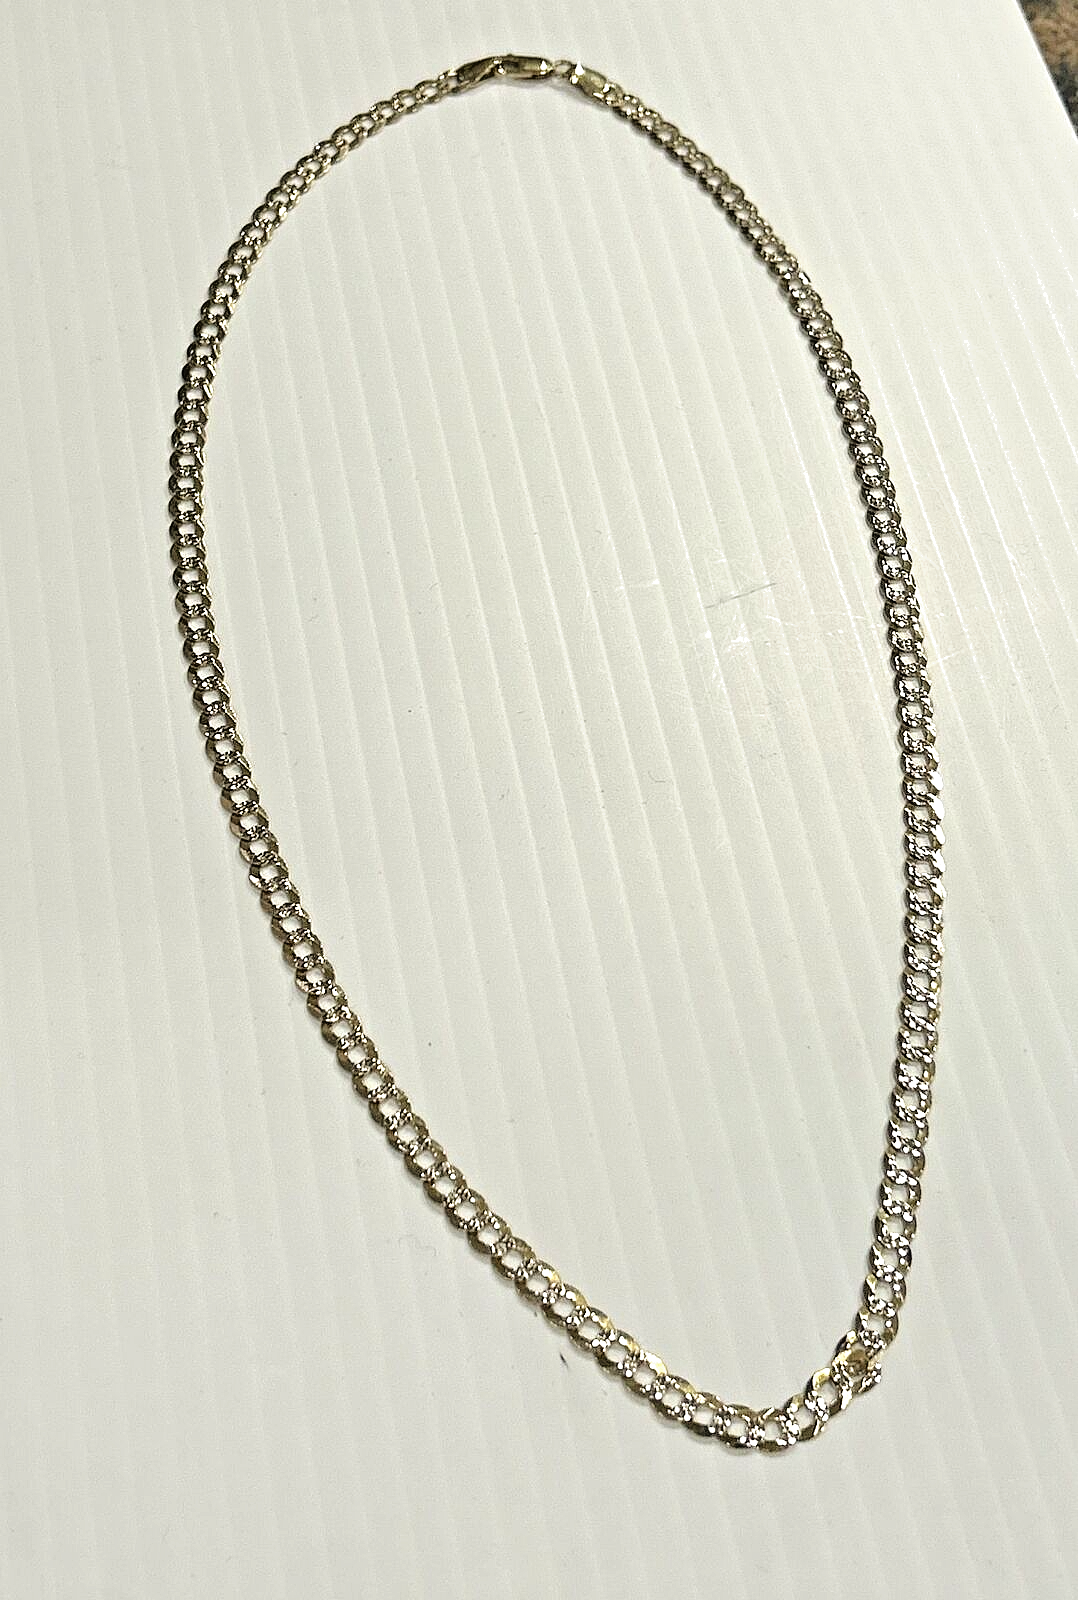 14k Solid GS Curb Link Chain w White 22" Inch, 16.5 grams, 5.6mm